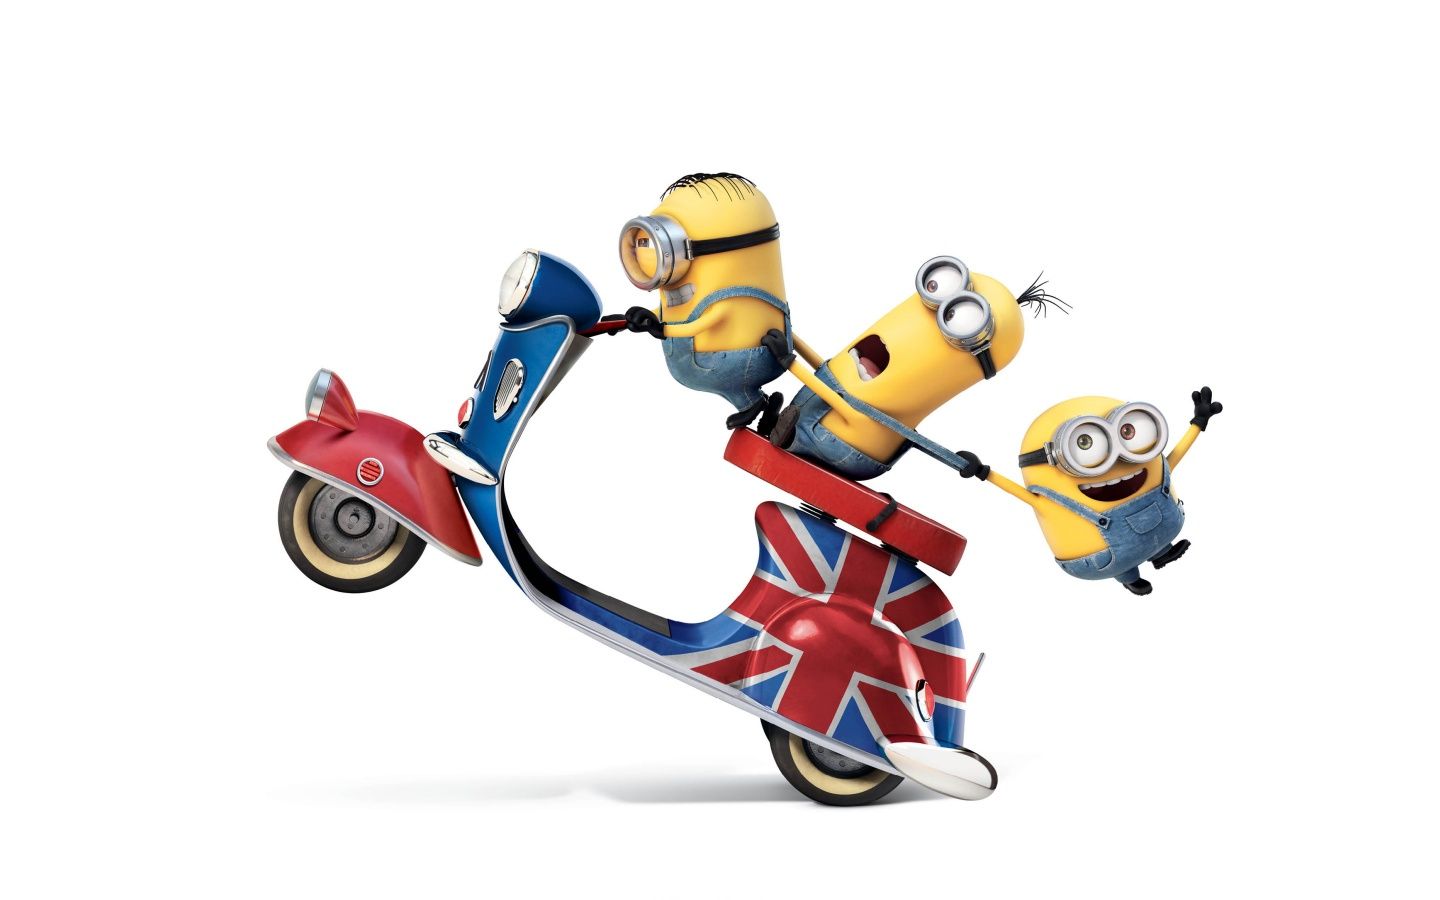 Funny Minions Wallpaper In Jpg Format .all Free Download.com